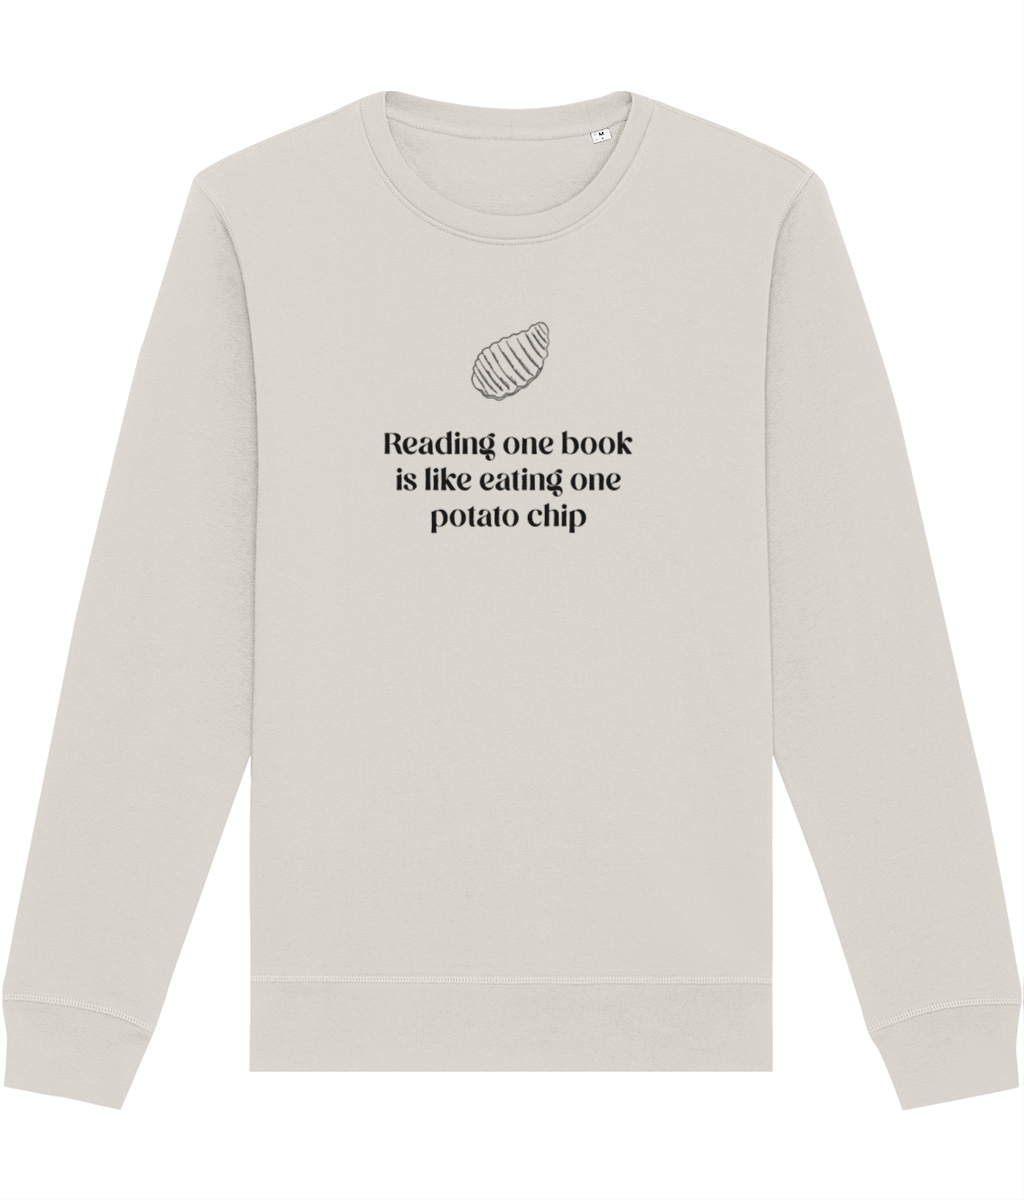 Books 'Can I Have More' Organic Cotton Sweatshirt - Book worm